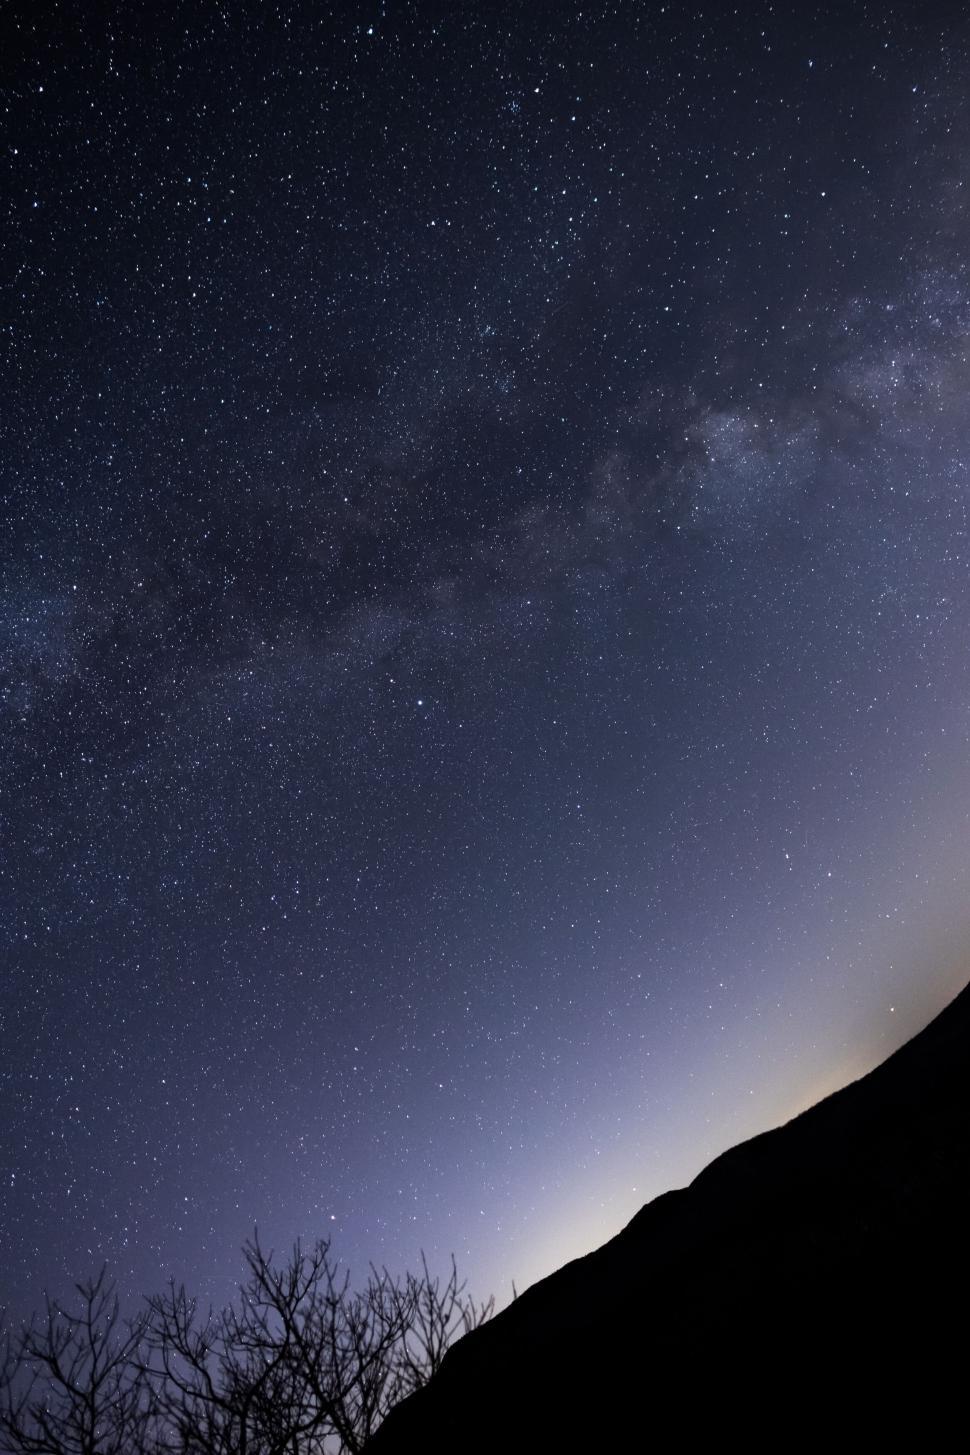 Free Image of Milky Way galaxy rising over barren hills 